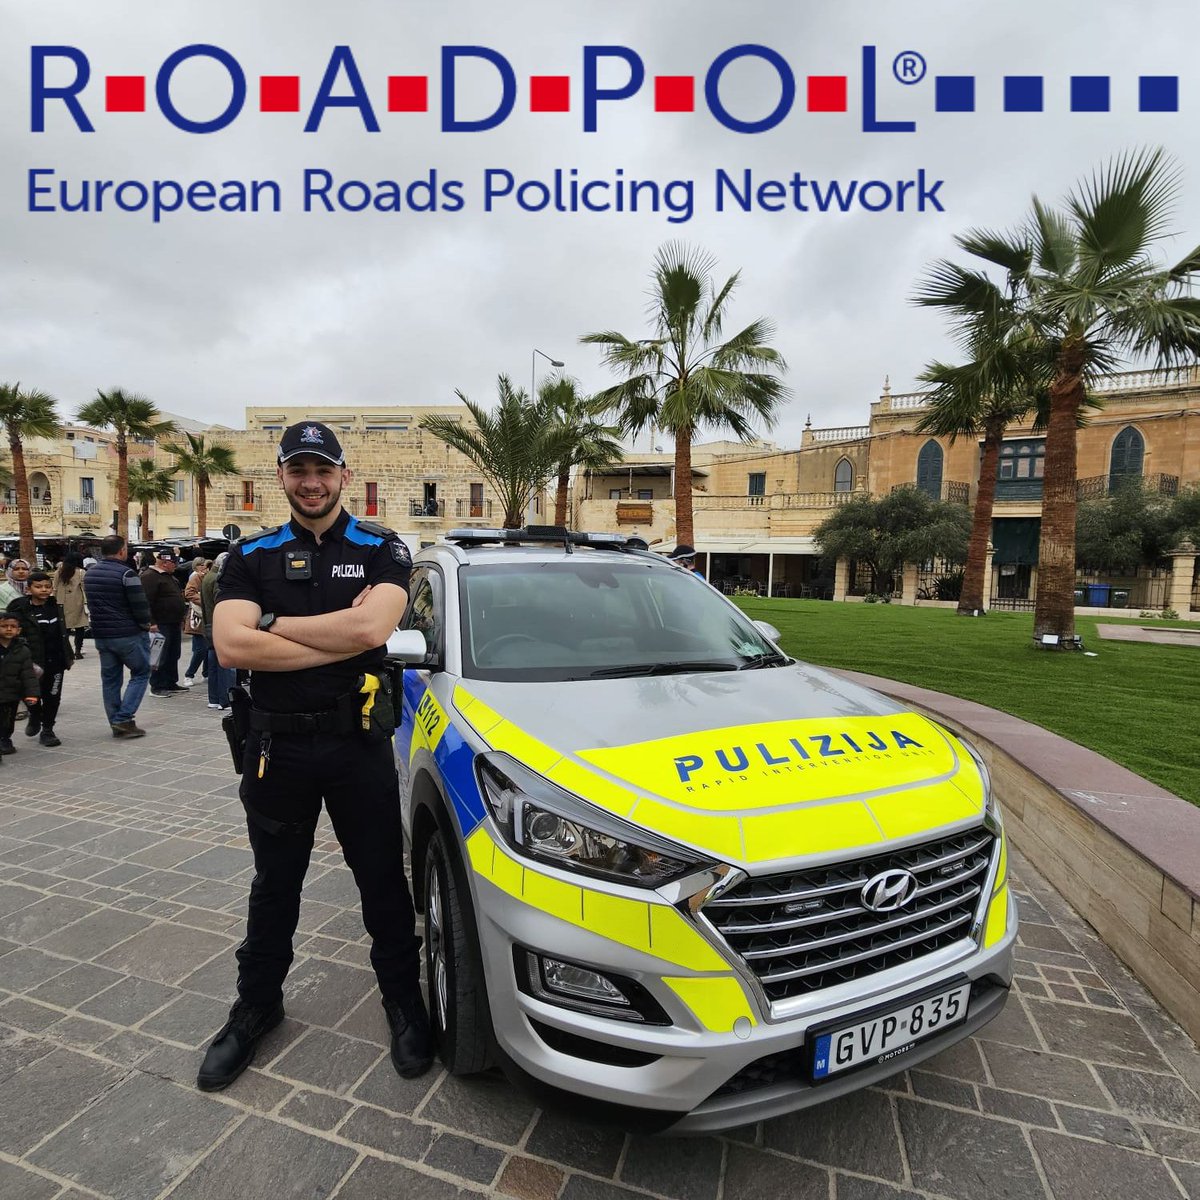 🇲🇹 Our traditional spring meeting is happening this week hosted by @MaltaPolice 👮‍♂️ 👮‍♀️ With more than 30 countries attending it will be a venue for sharing advanced policing practices, dynamic workshops and paths to more road safety in our shared home Europe. #police #roadsafety